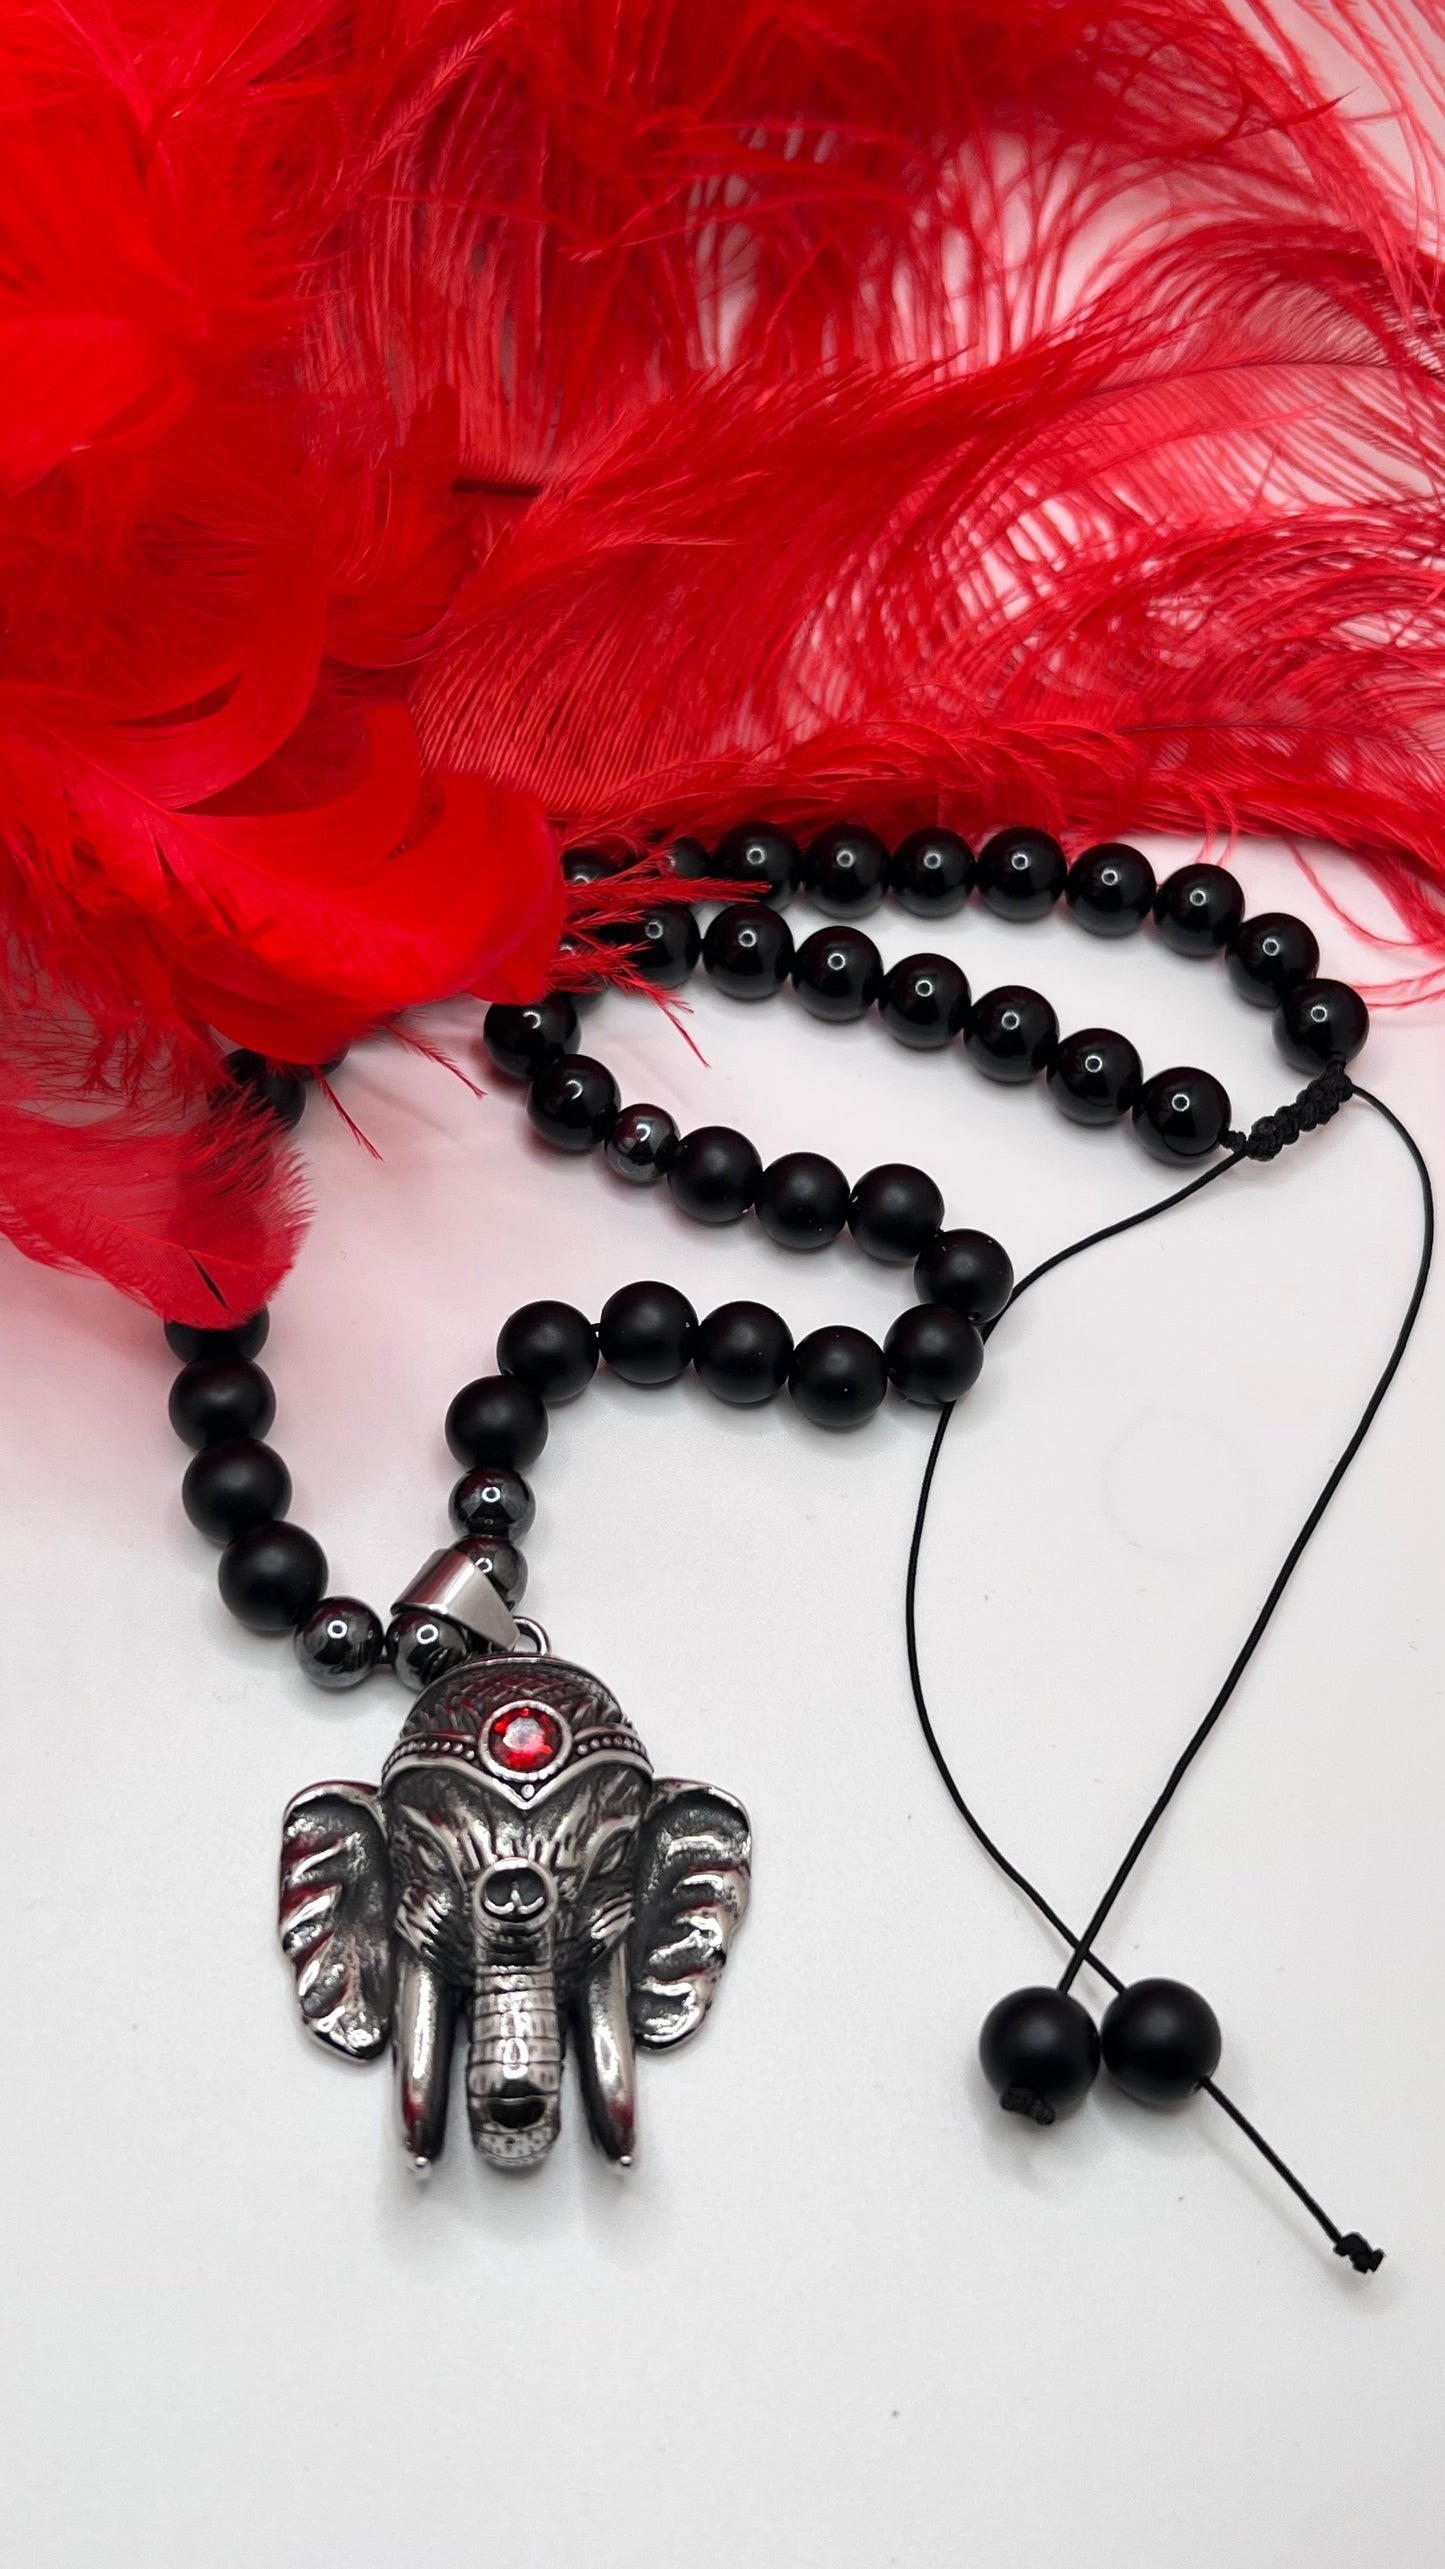 Onyx-Increase regeneration, happiness, intuition, instincts necklace with stainless steel Ganesh pendant (length 18")